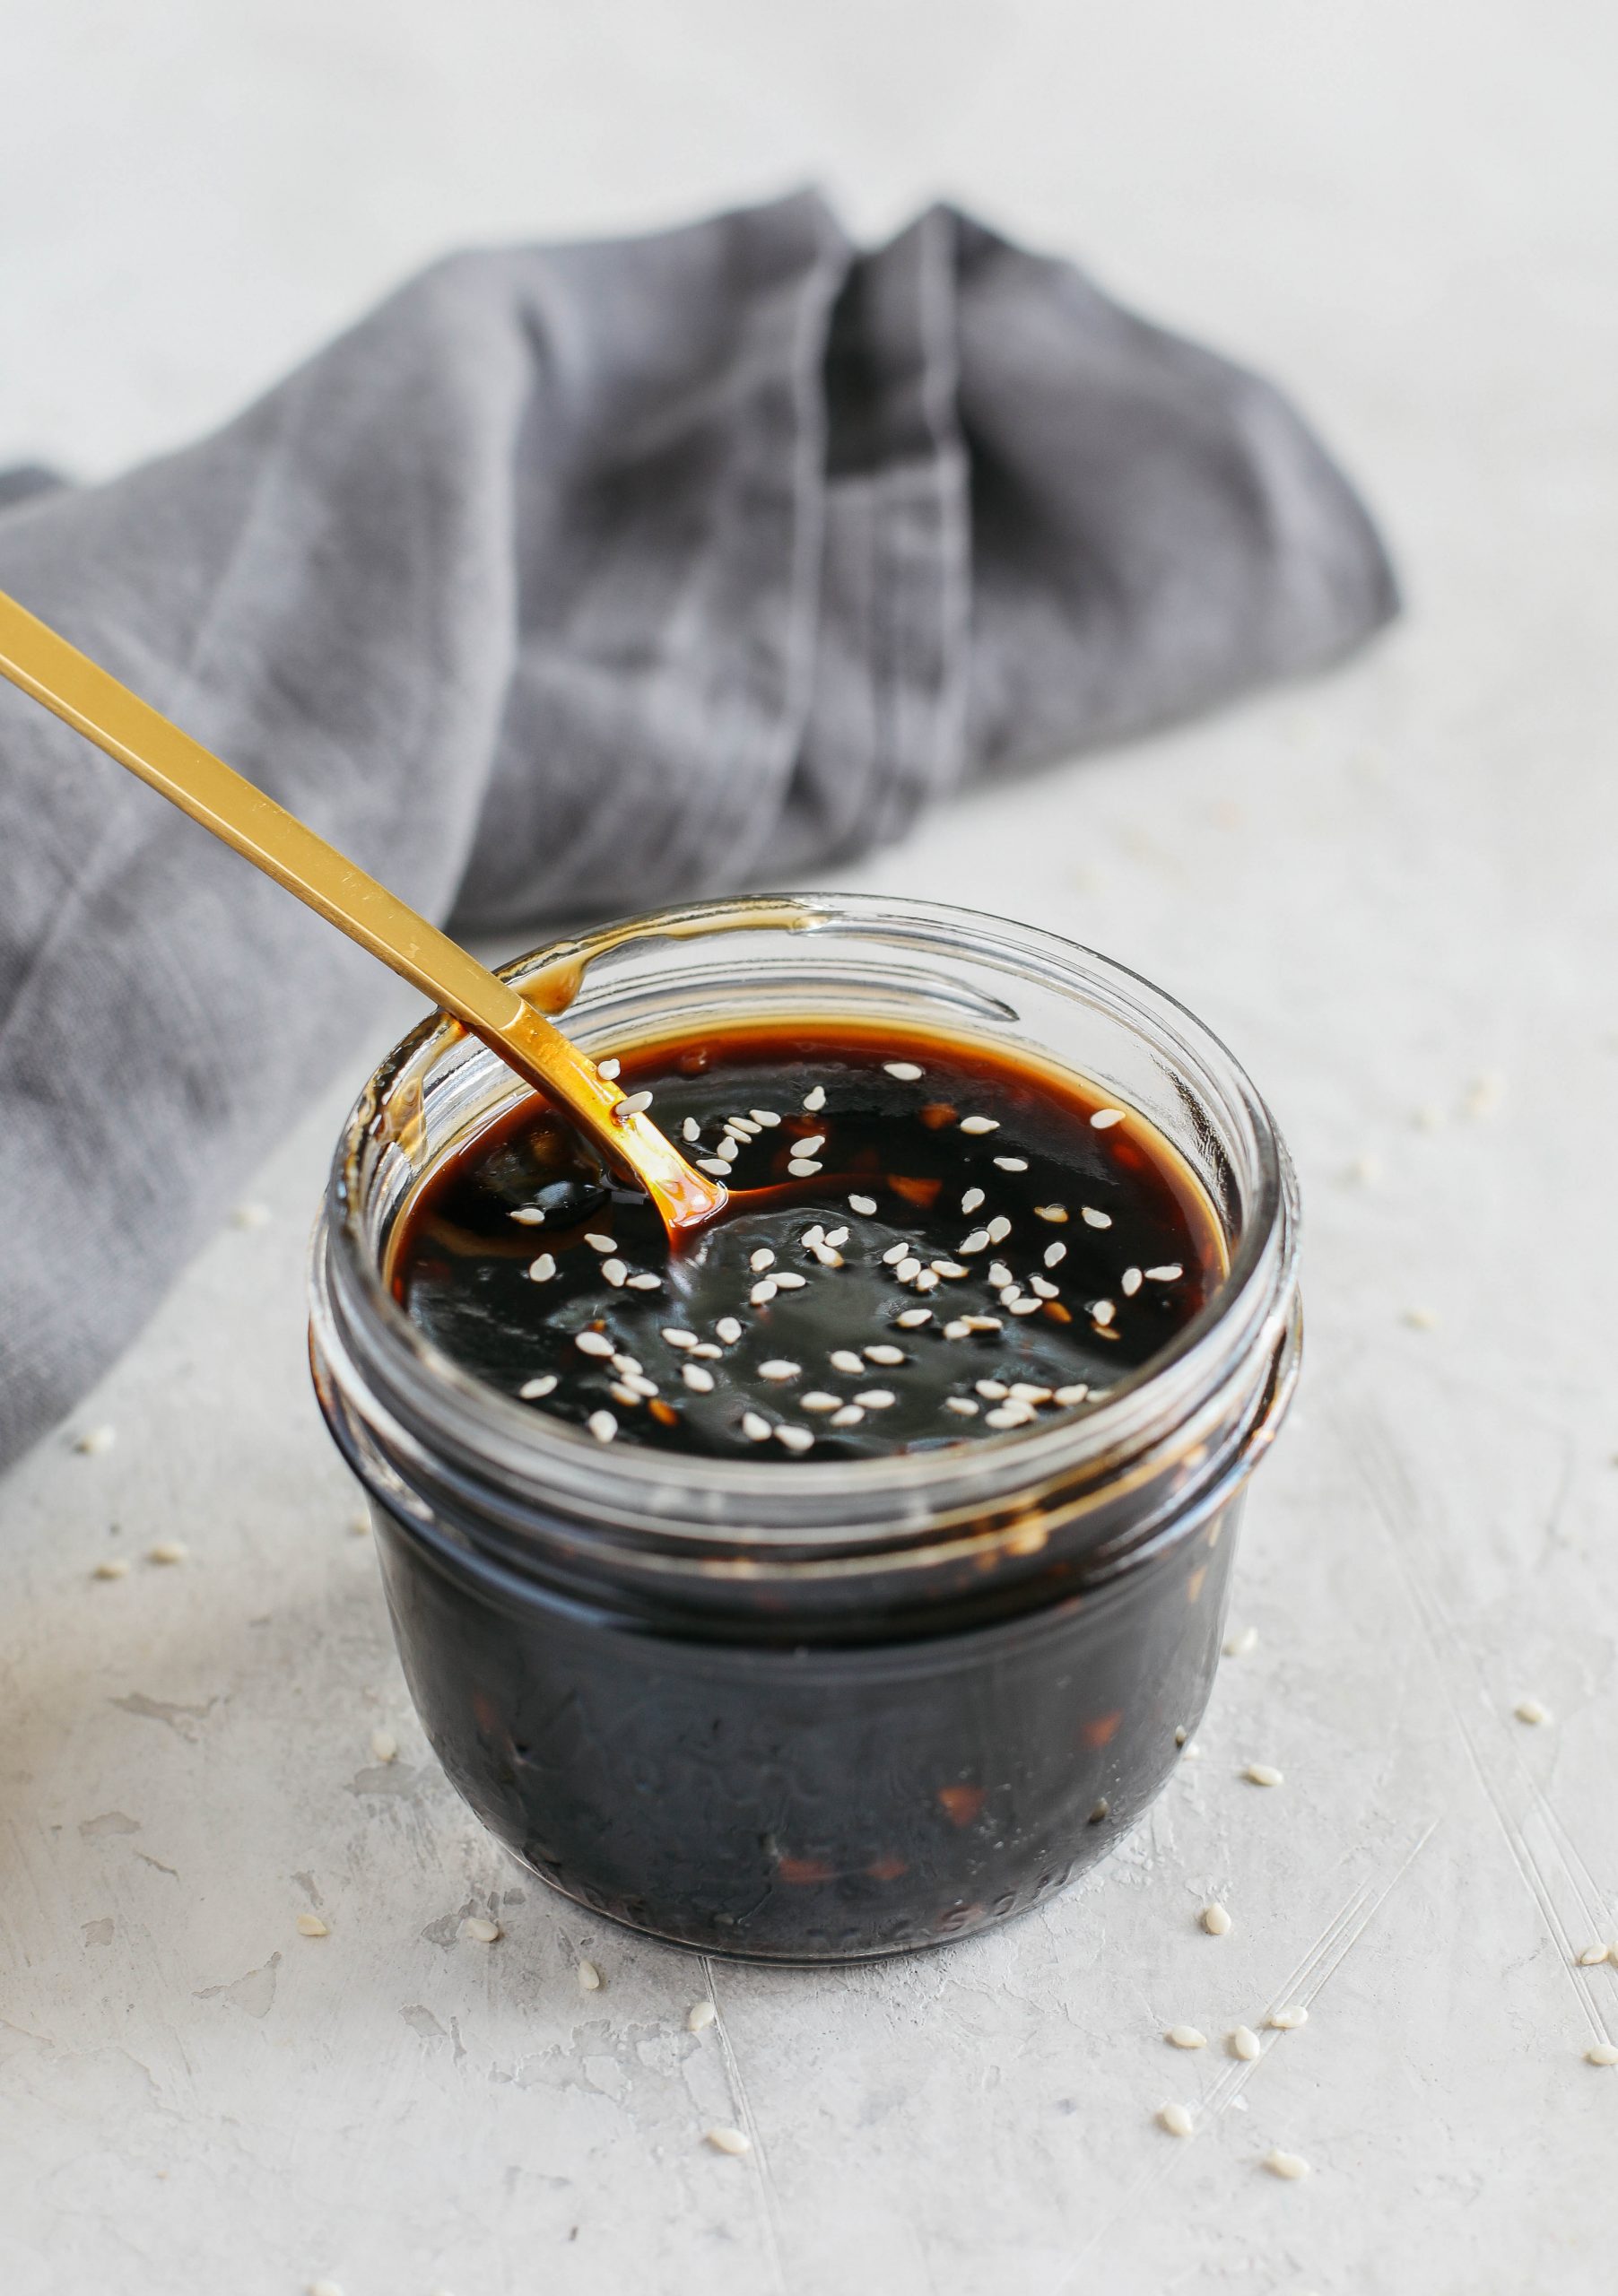 Skip store-bought and make this EASY Healthy Teriyaki Sauce that is sticky, sweet and made in just 5 minutes using fresh, simple ingredients!